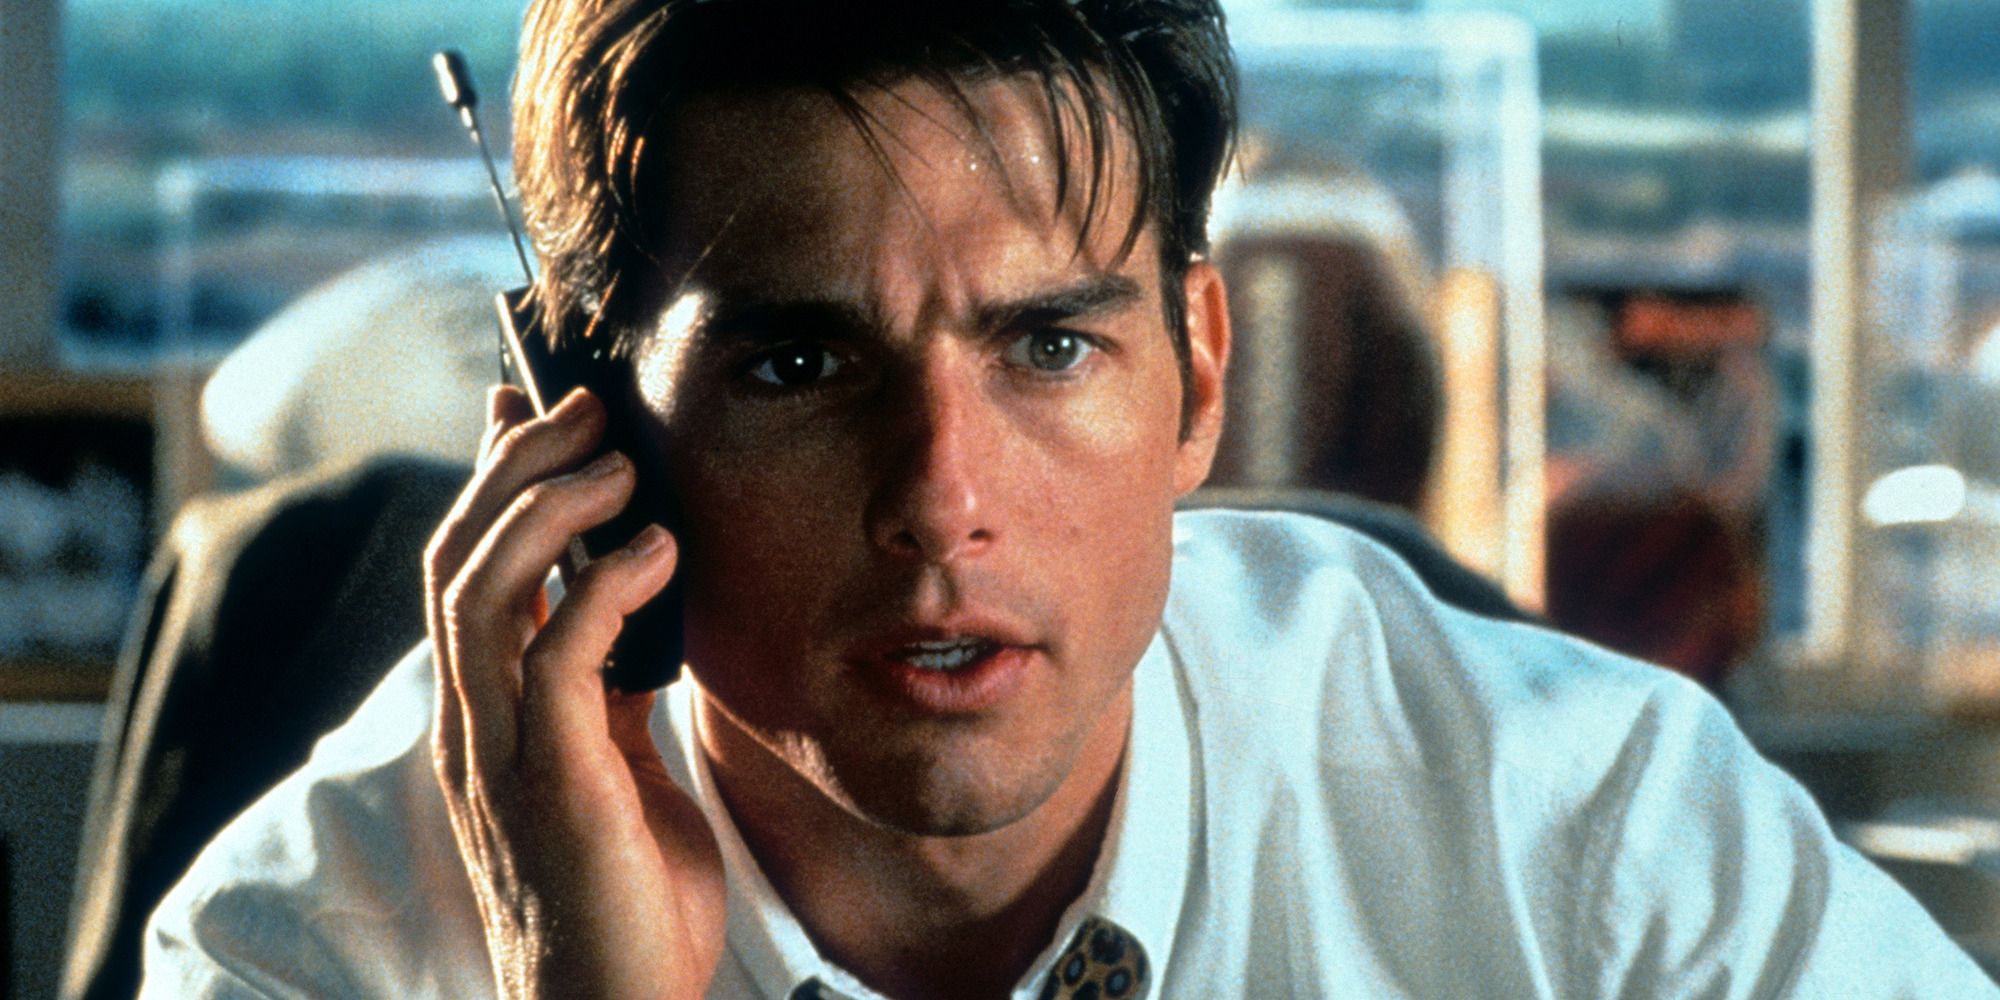 Tom Cruise in 'Jerry Maguire', talking over the phone in his office